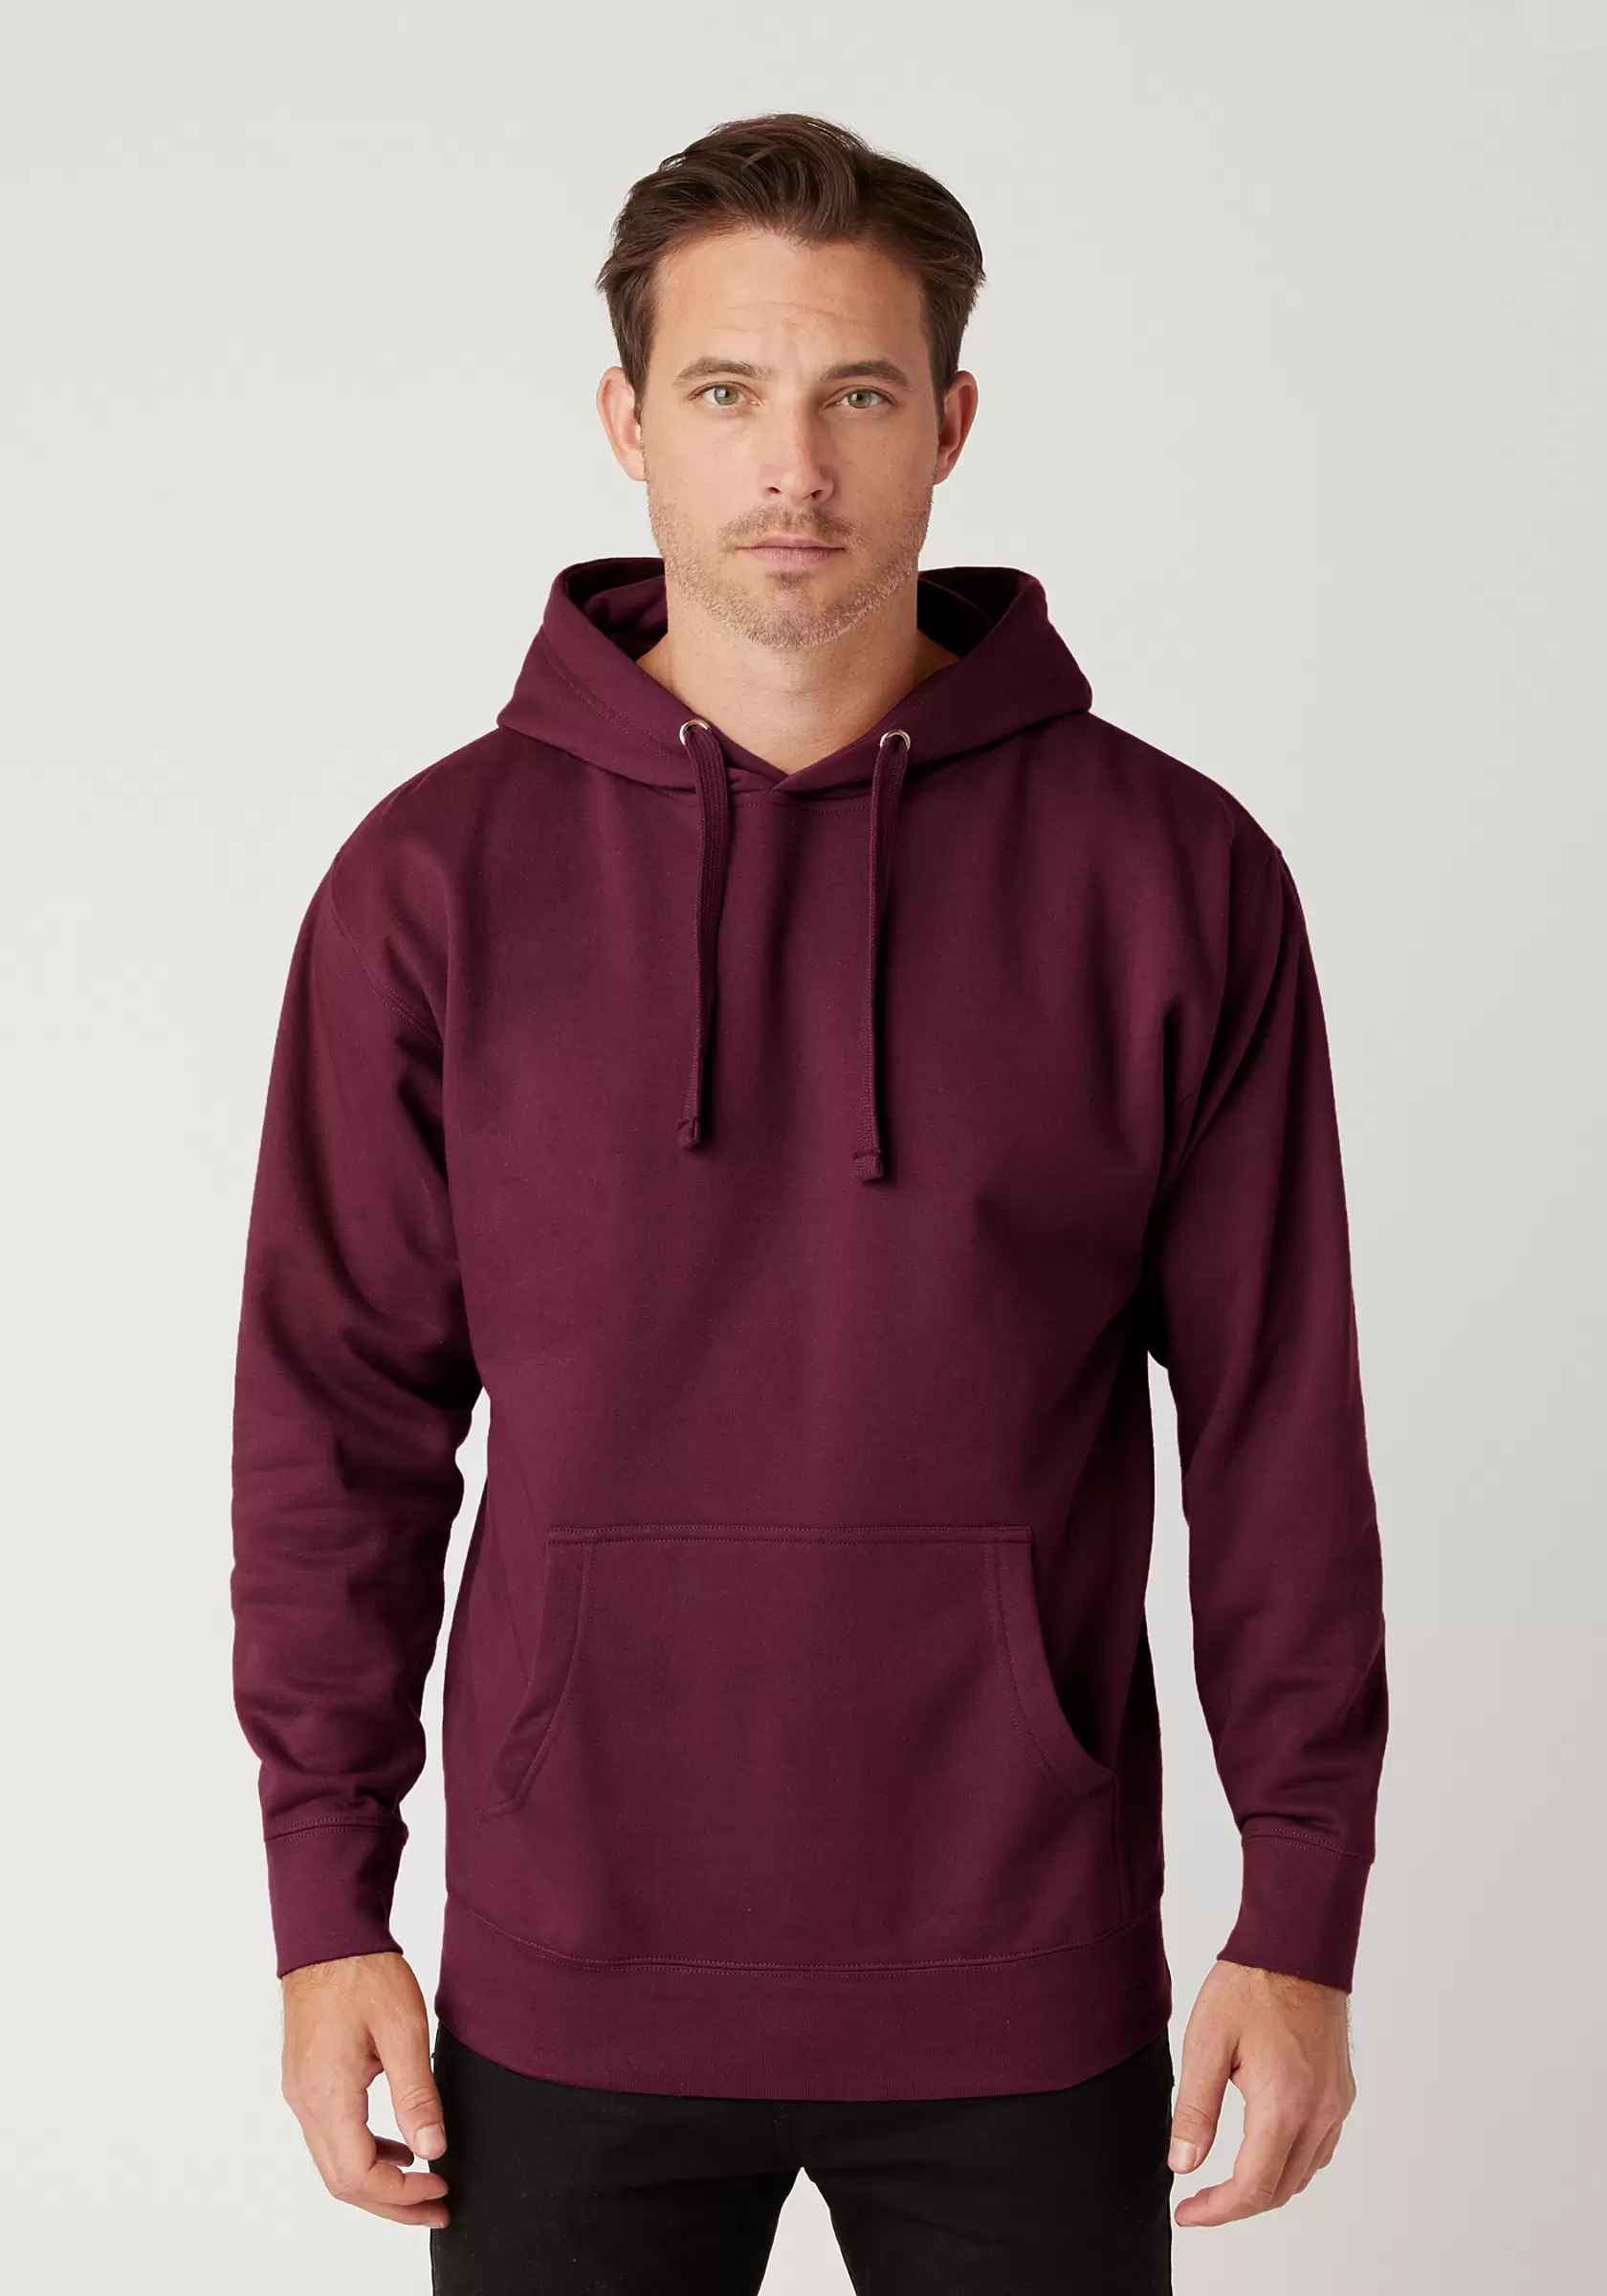 Cotton Heritage M2580 PREMIUM PULLOVER HOODIE Maroon - From $16.07